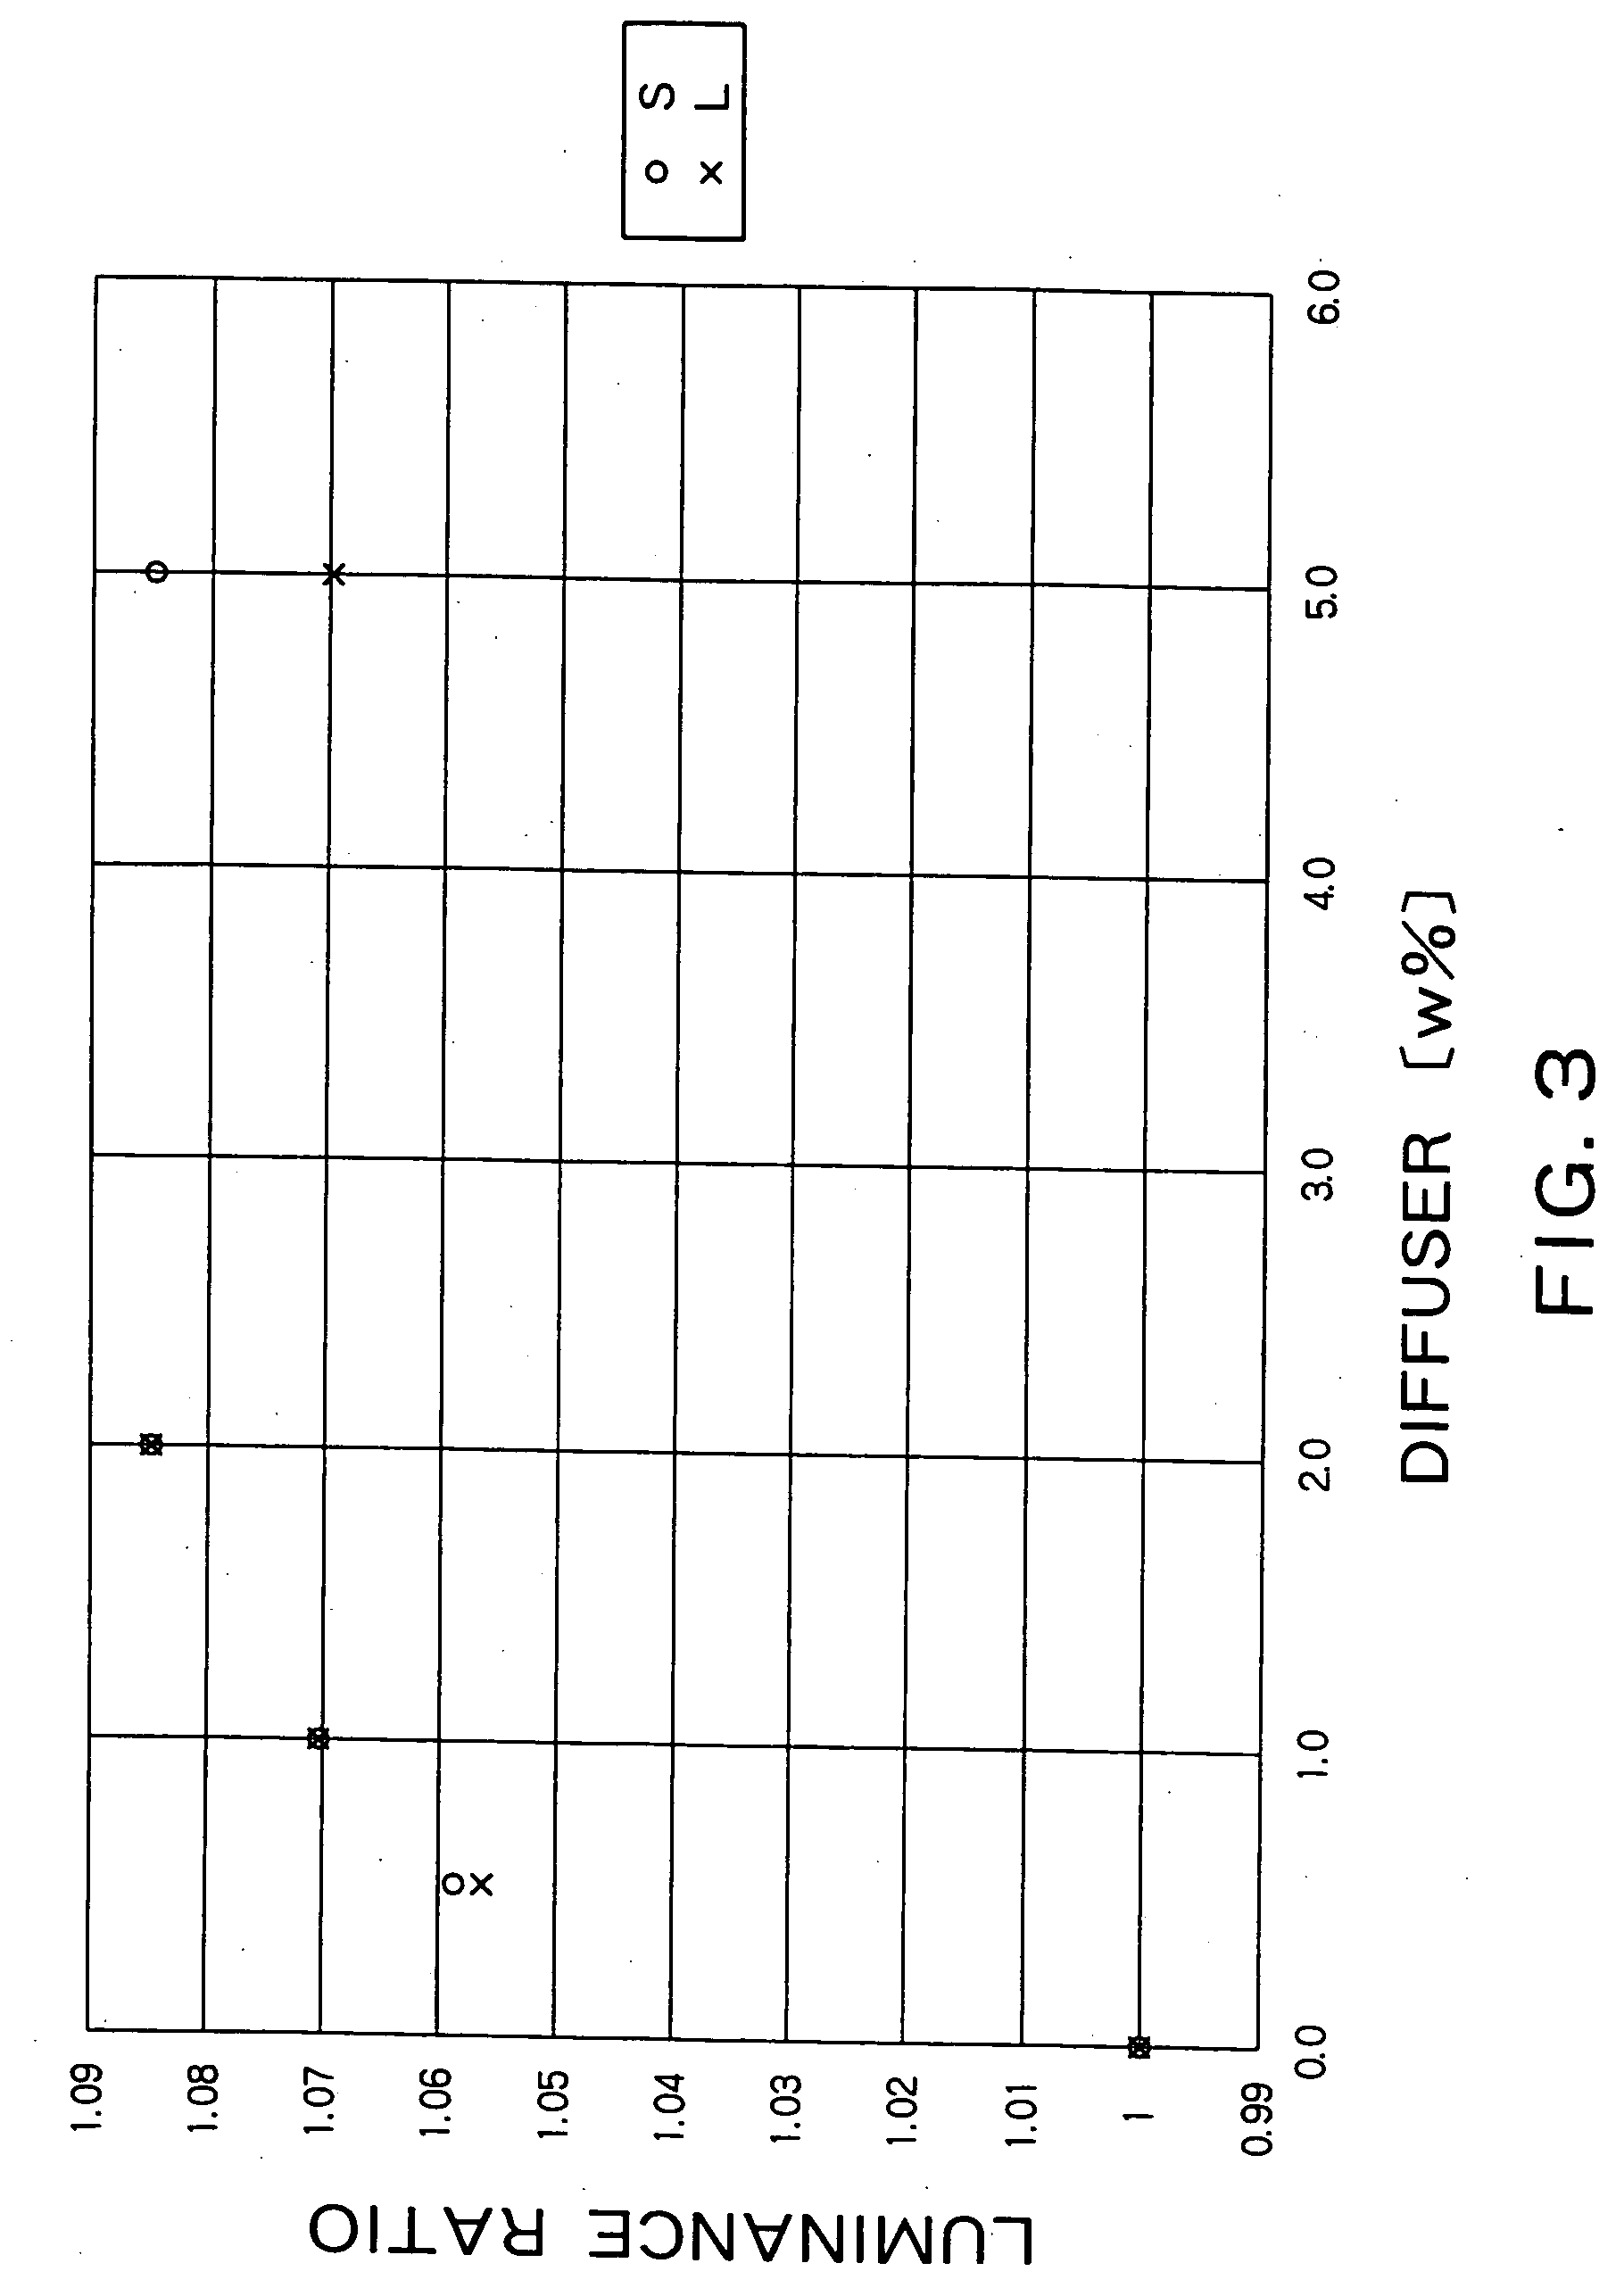 Semiconductor light emitting device and method for manufacturing same